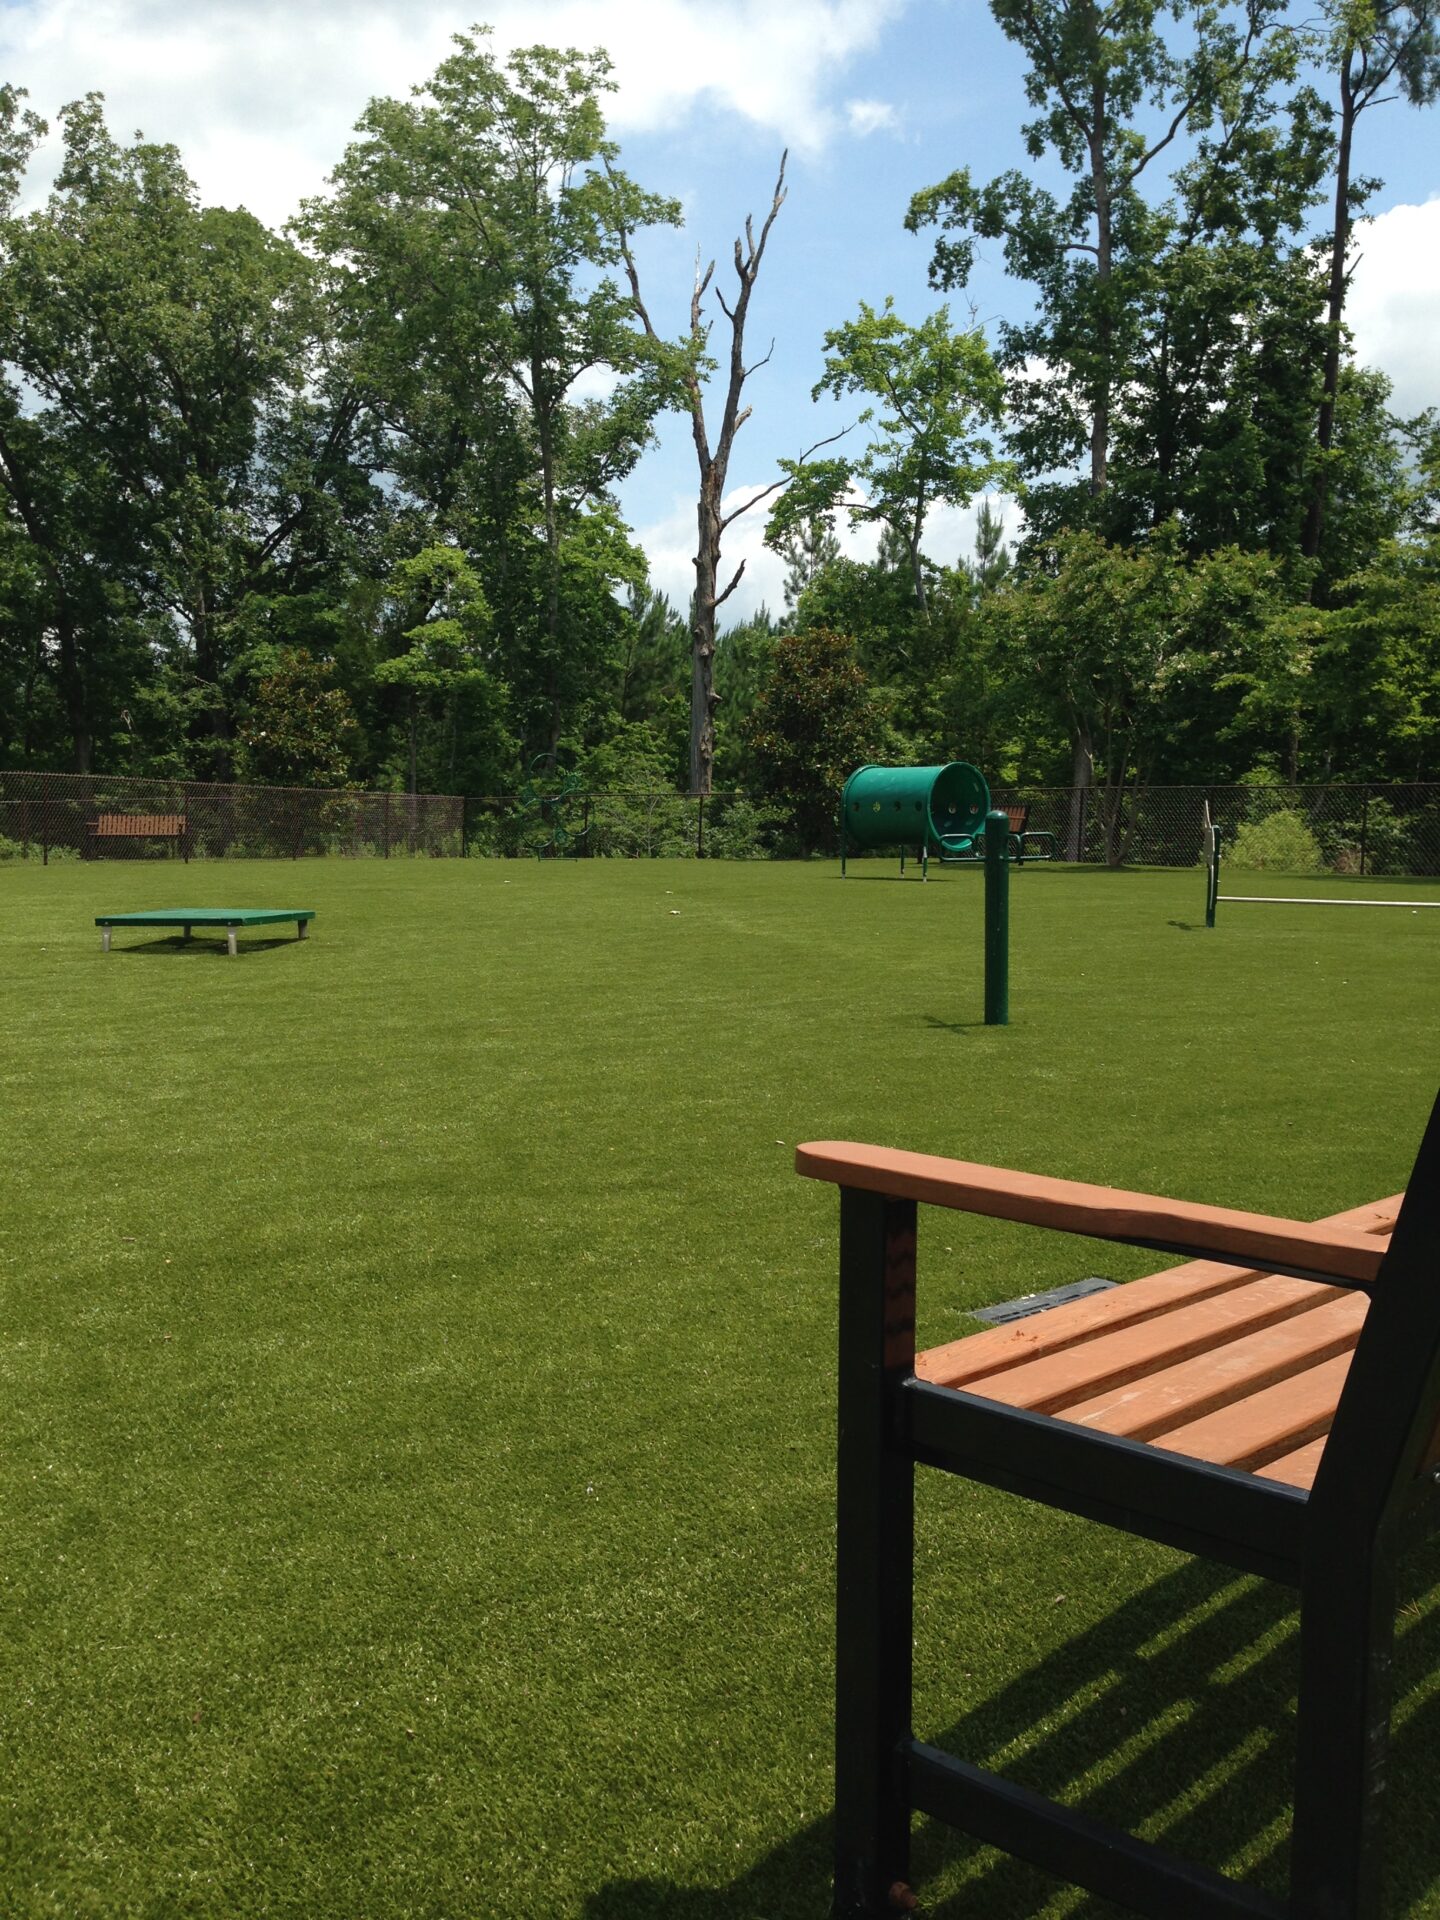 A park with green artificial turf showcases a playground with a green play tunnel, bench, lush trees in the background, and a clear blue sky.